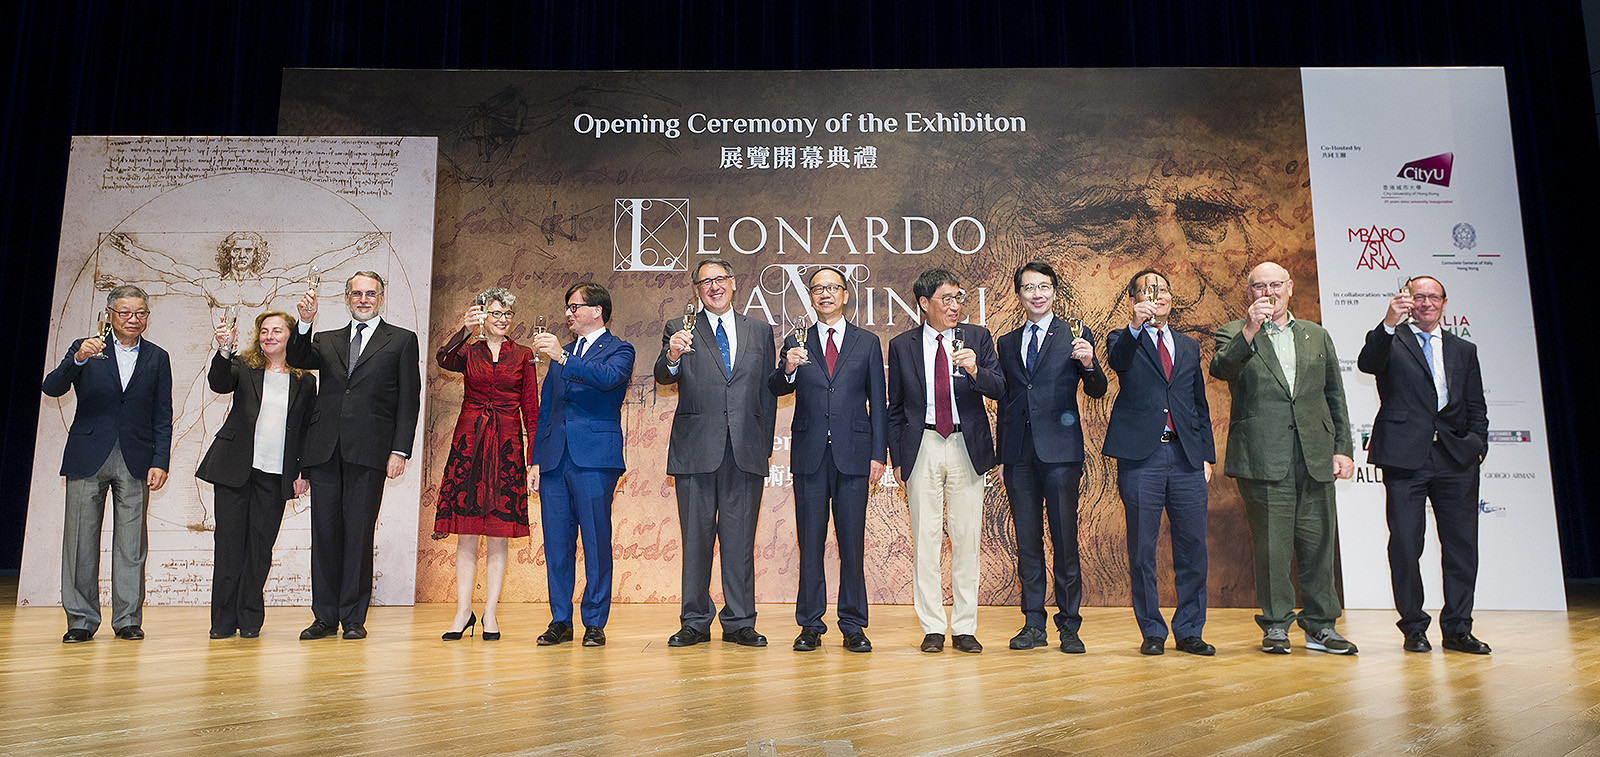 guests raise a toast at the opening ceremony.